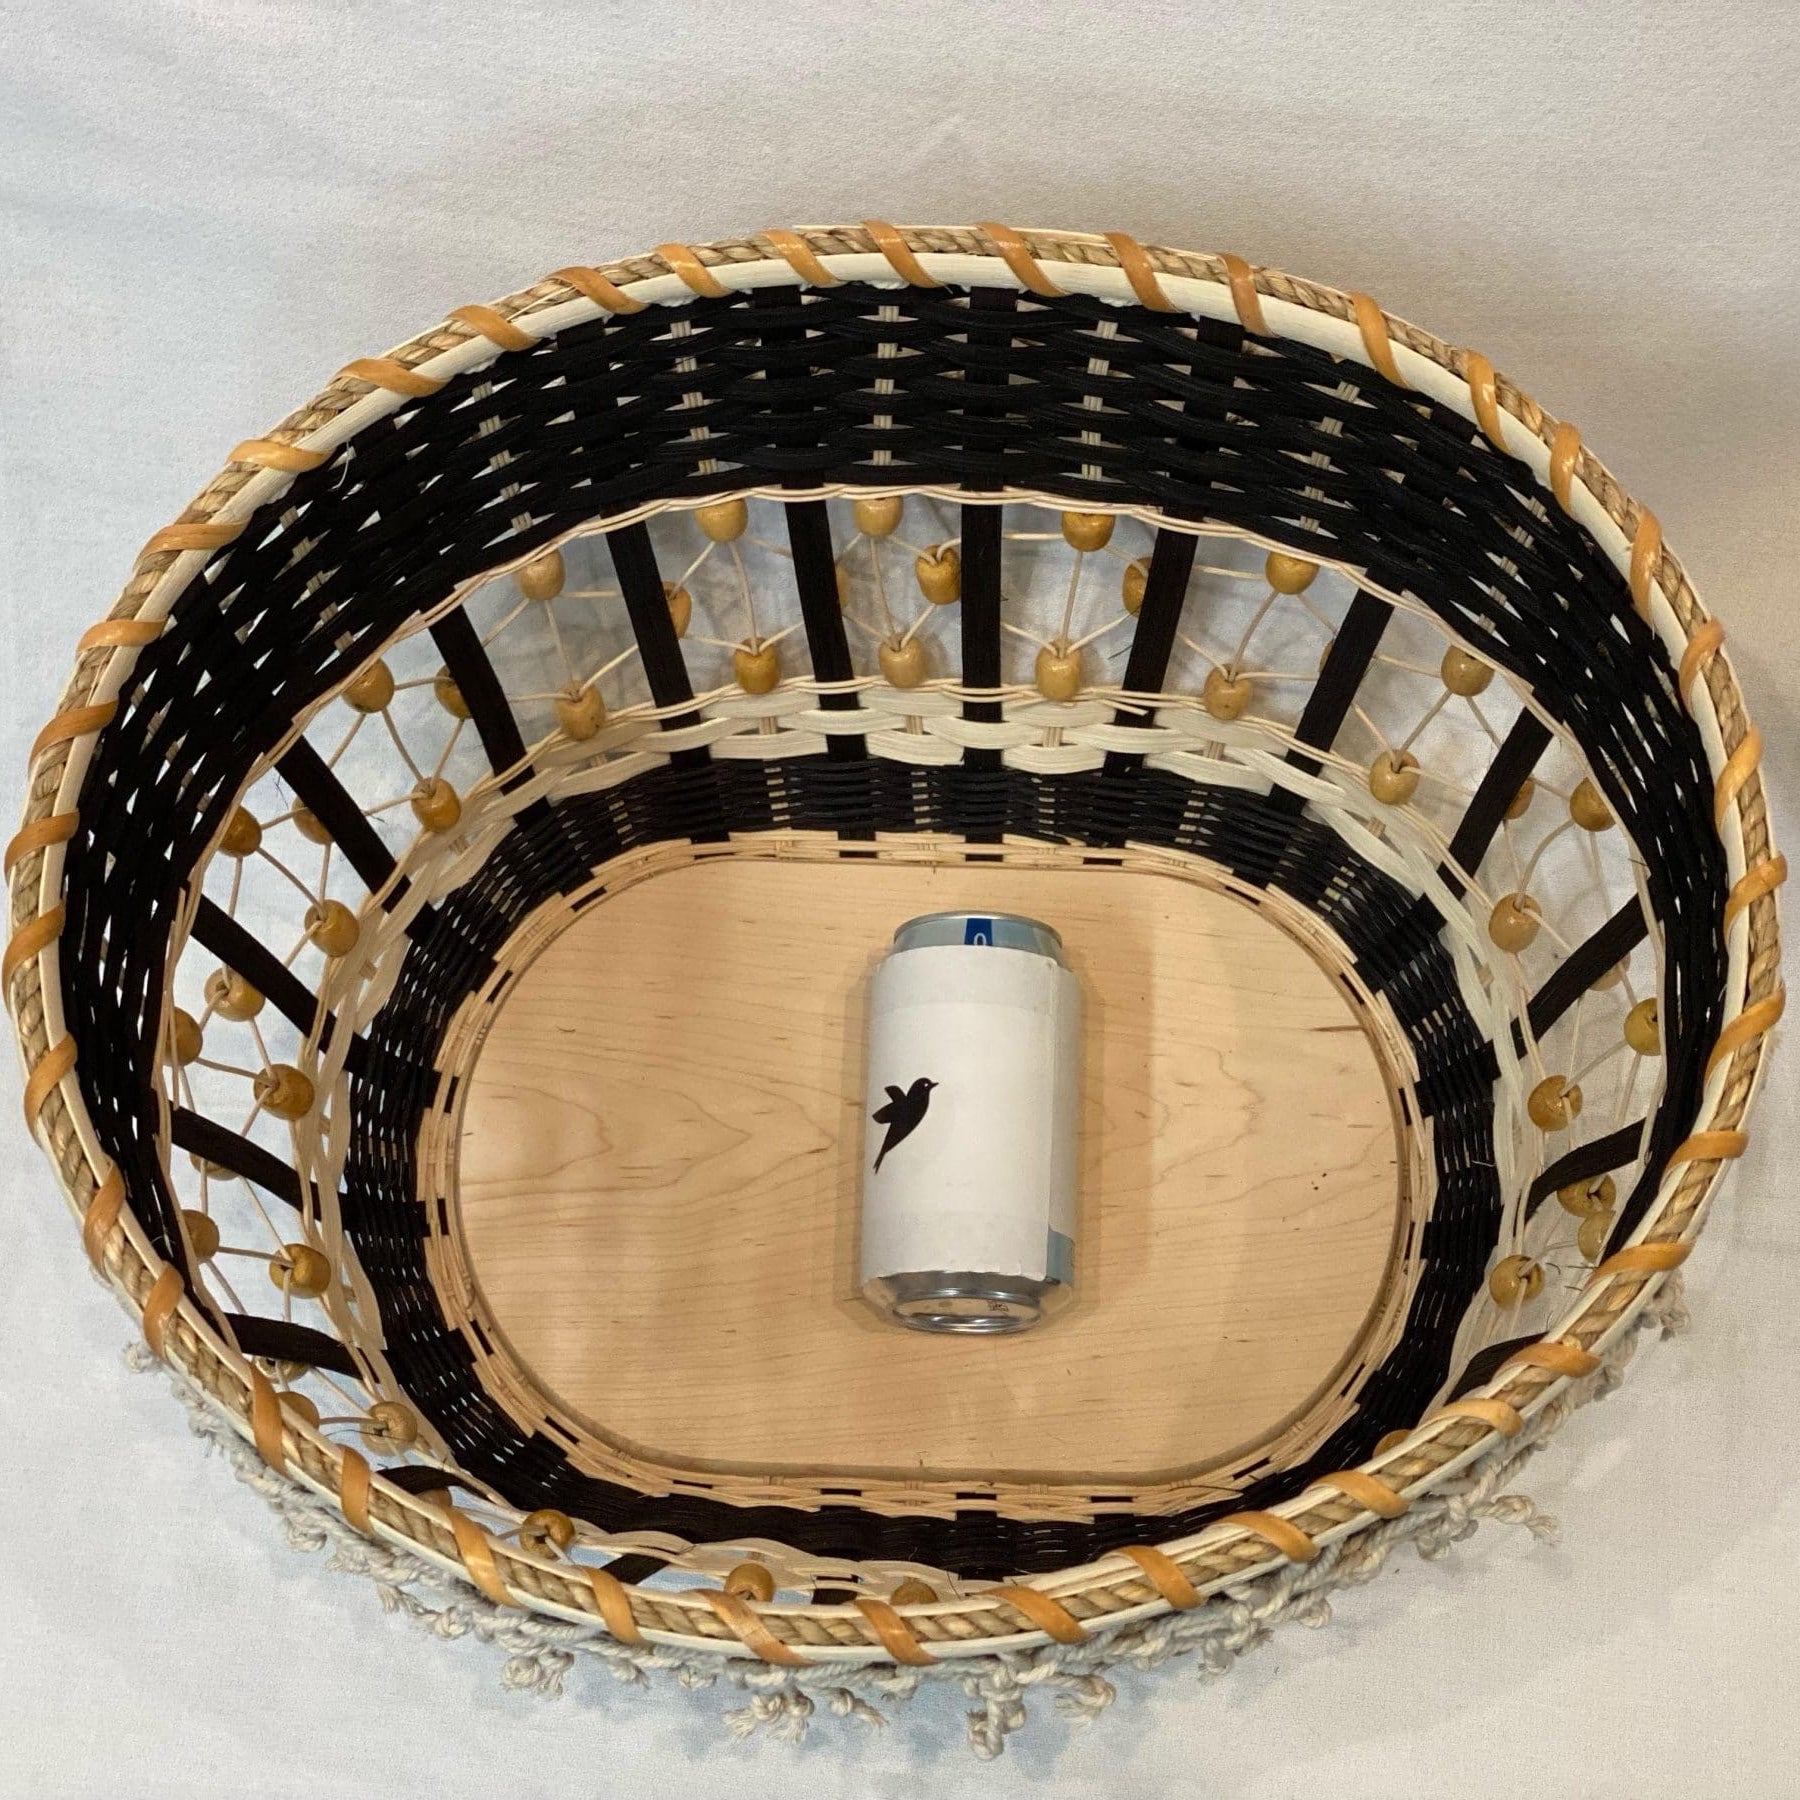 For The Art of It Basket